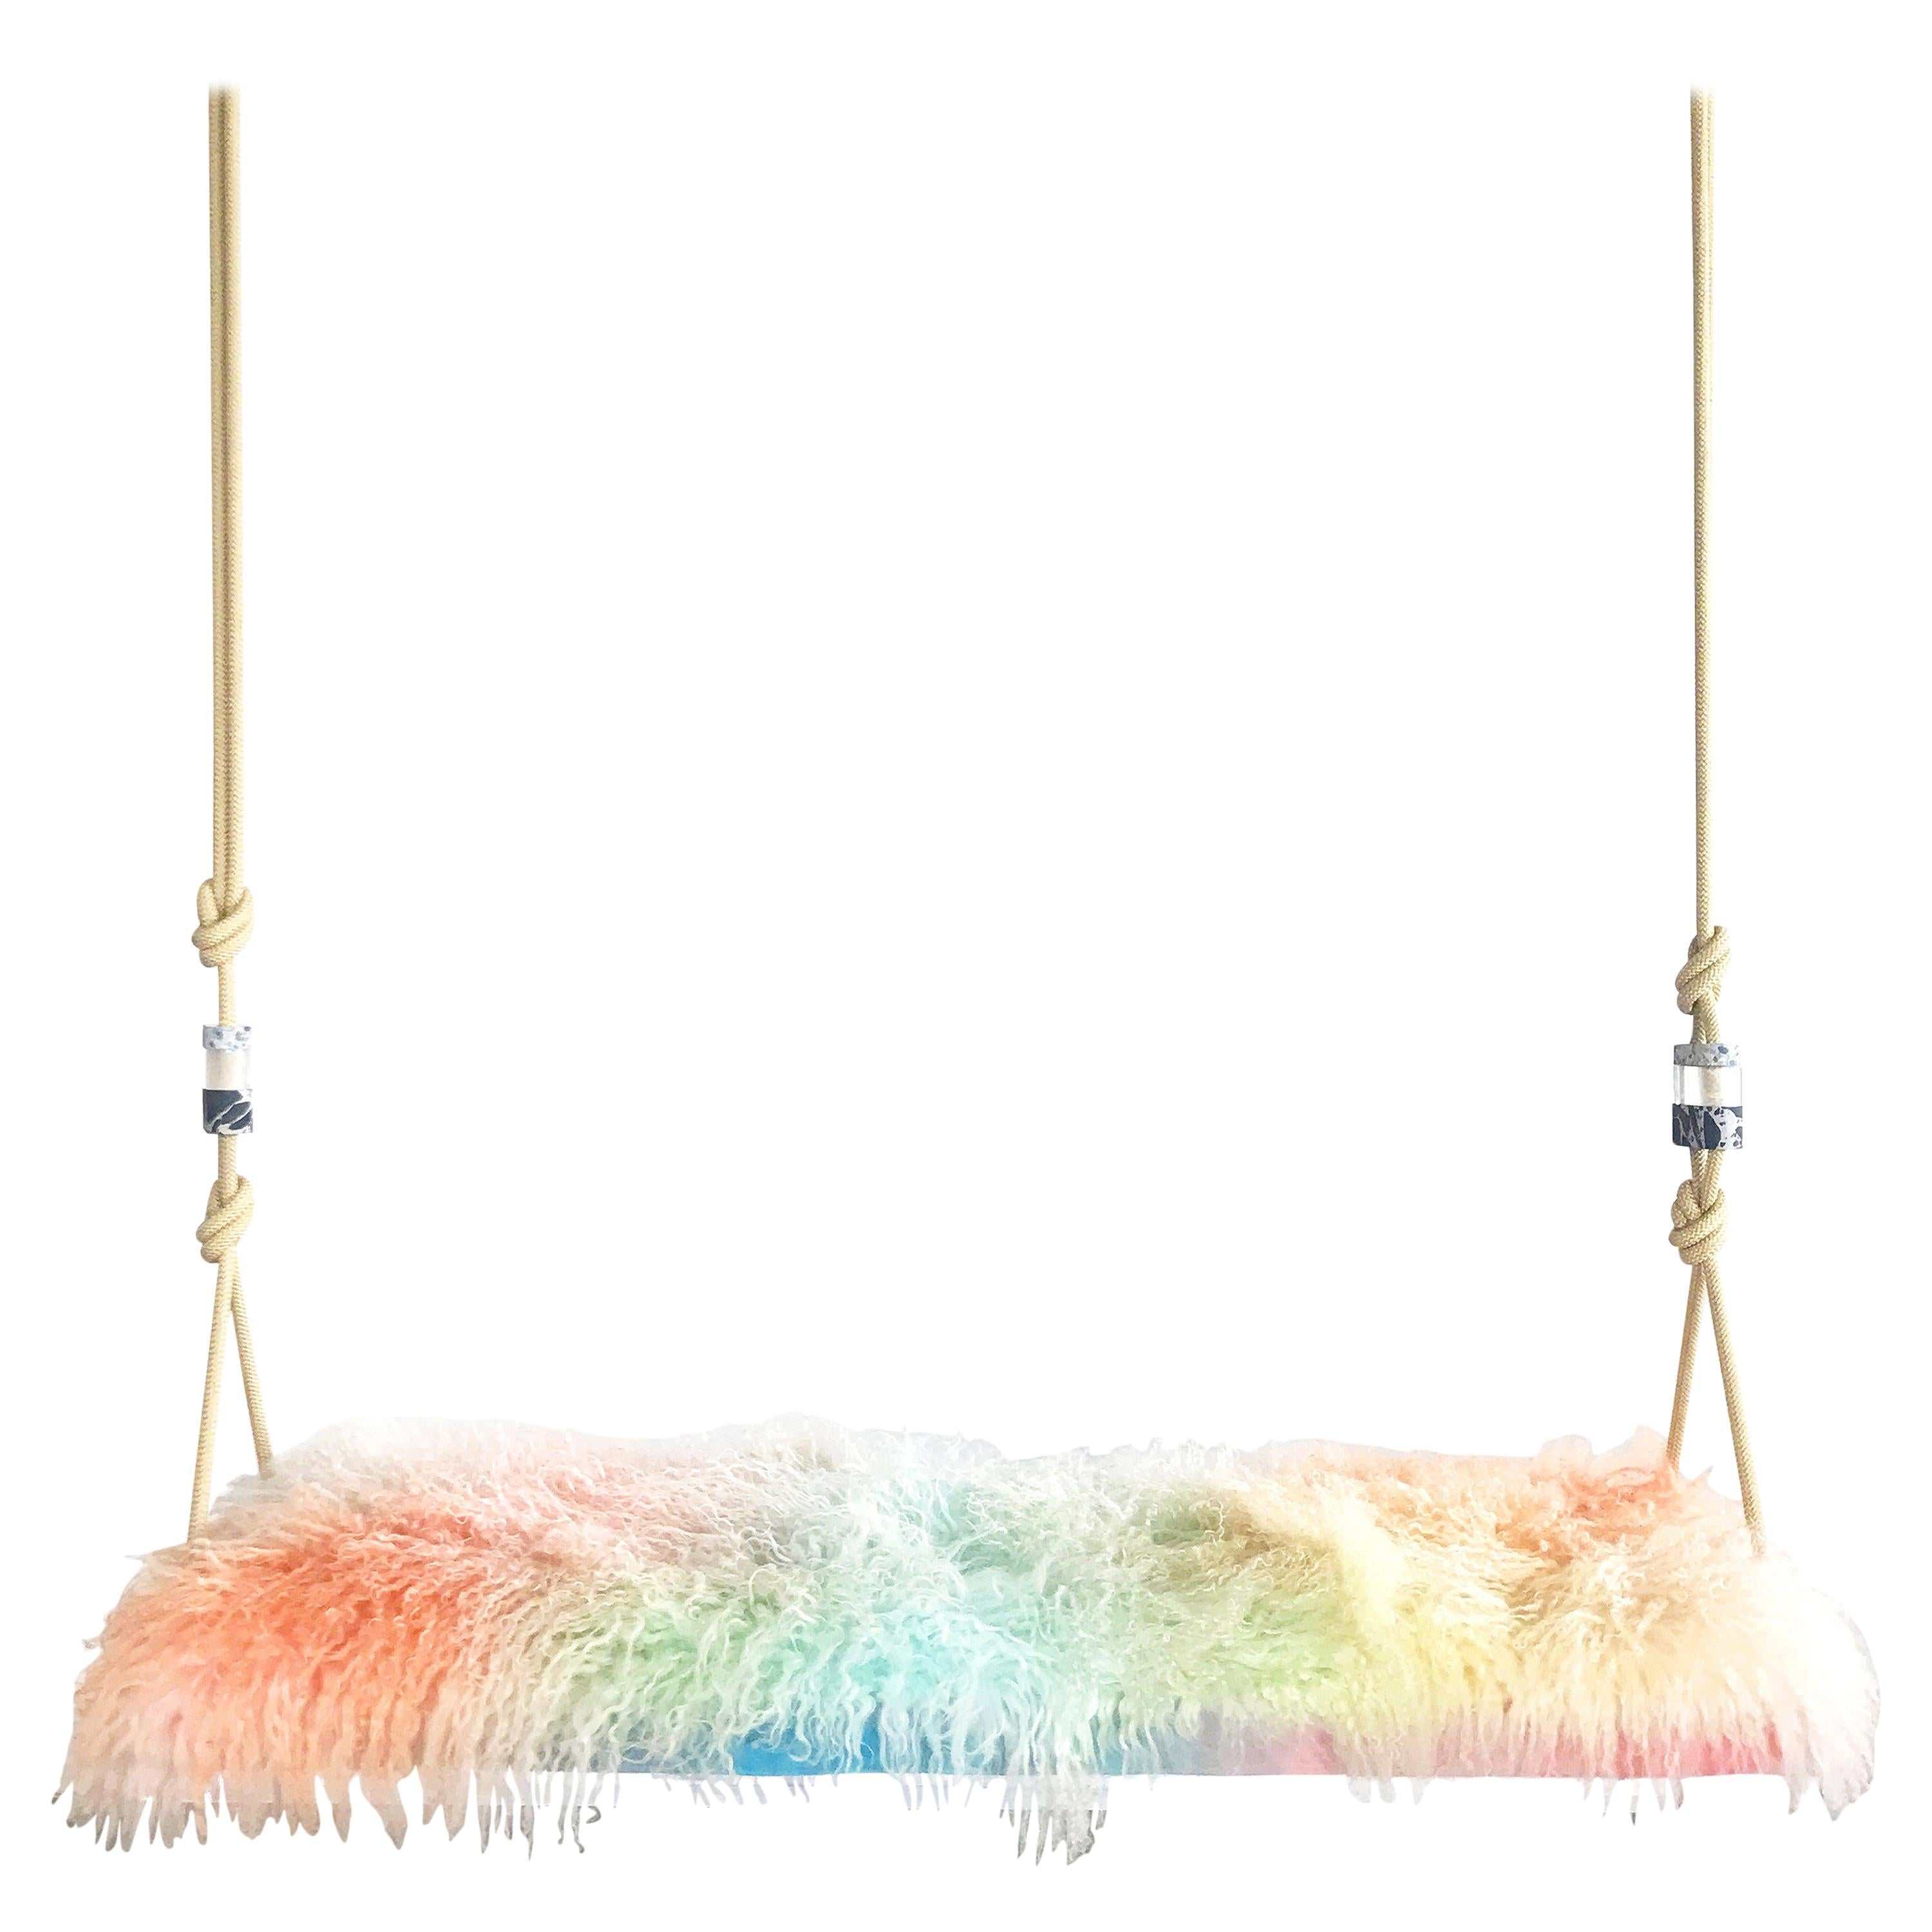 Cotton Candy Swing, Multi-Color, Made to Order